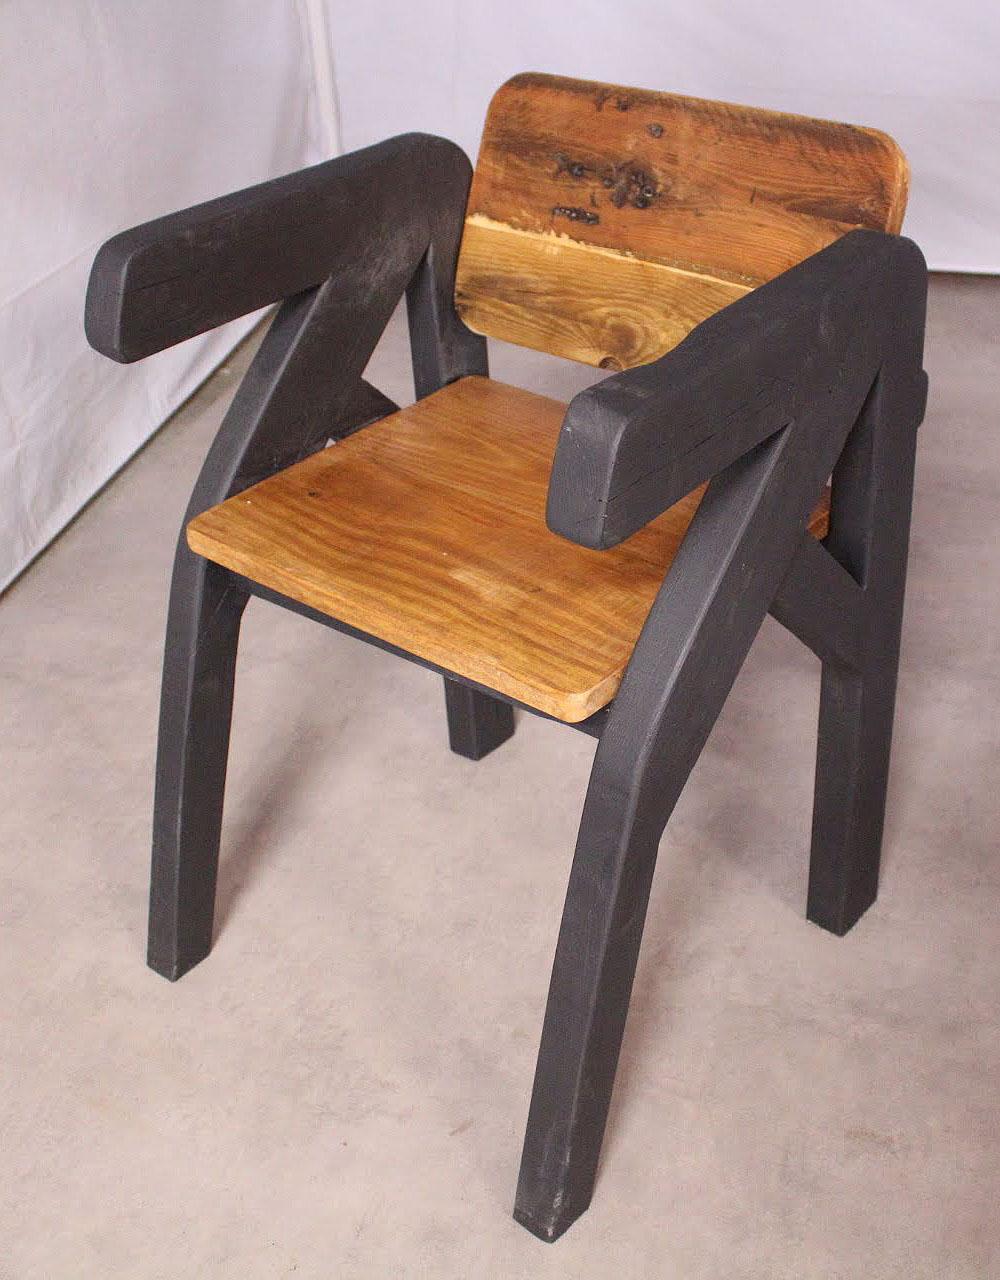 Industrial French Artisan Made Chair One of a Kind Late 20th Century Brutalist Folk Art